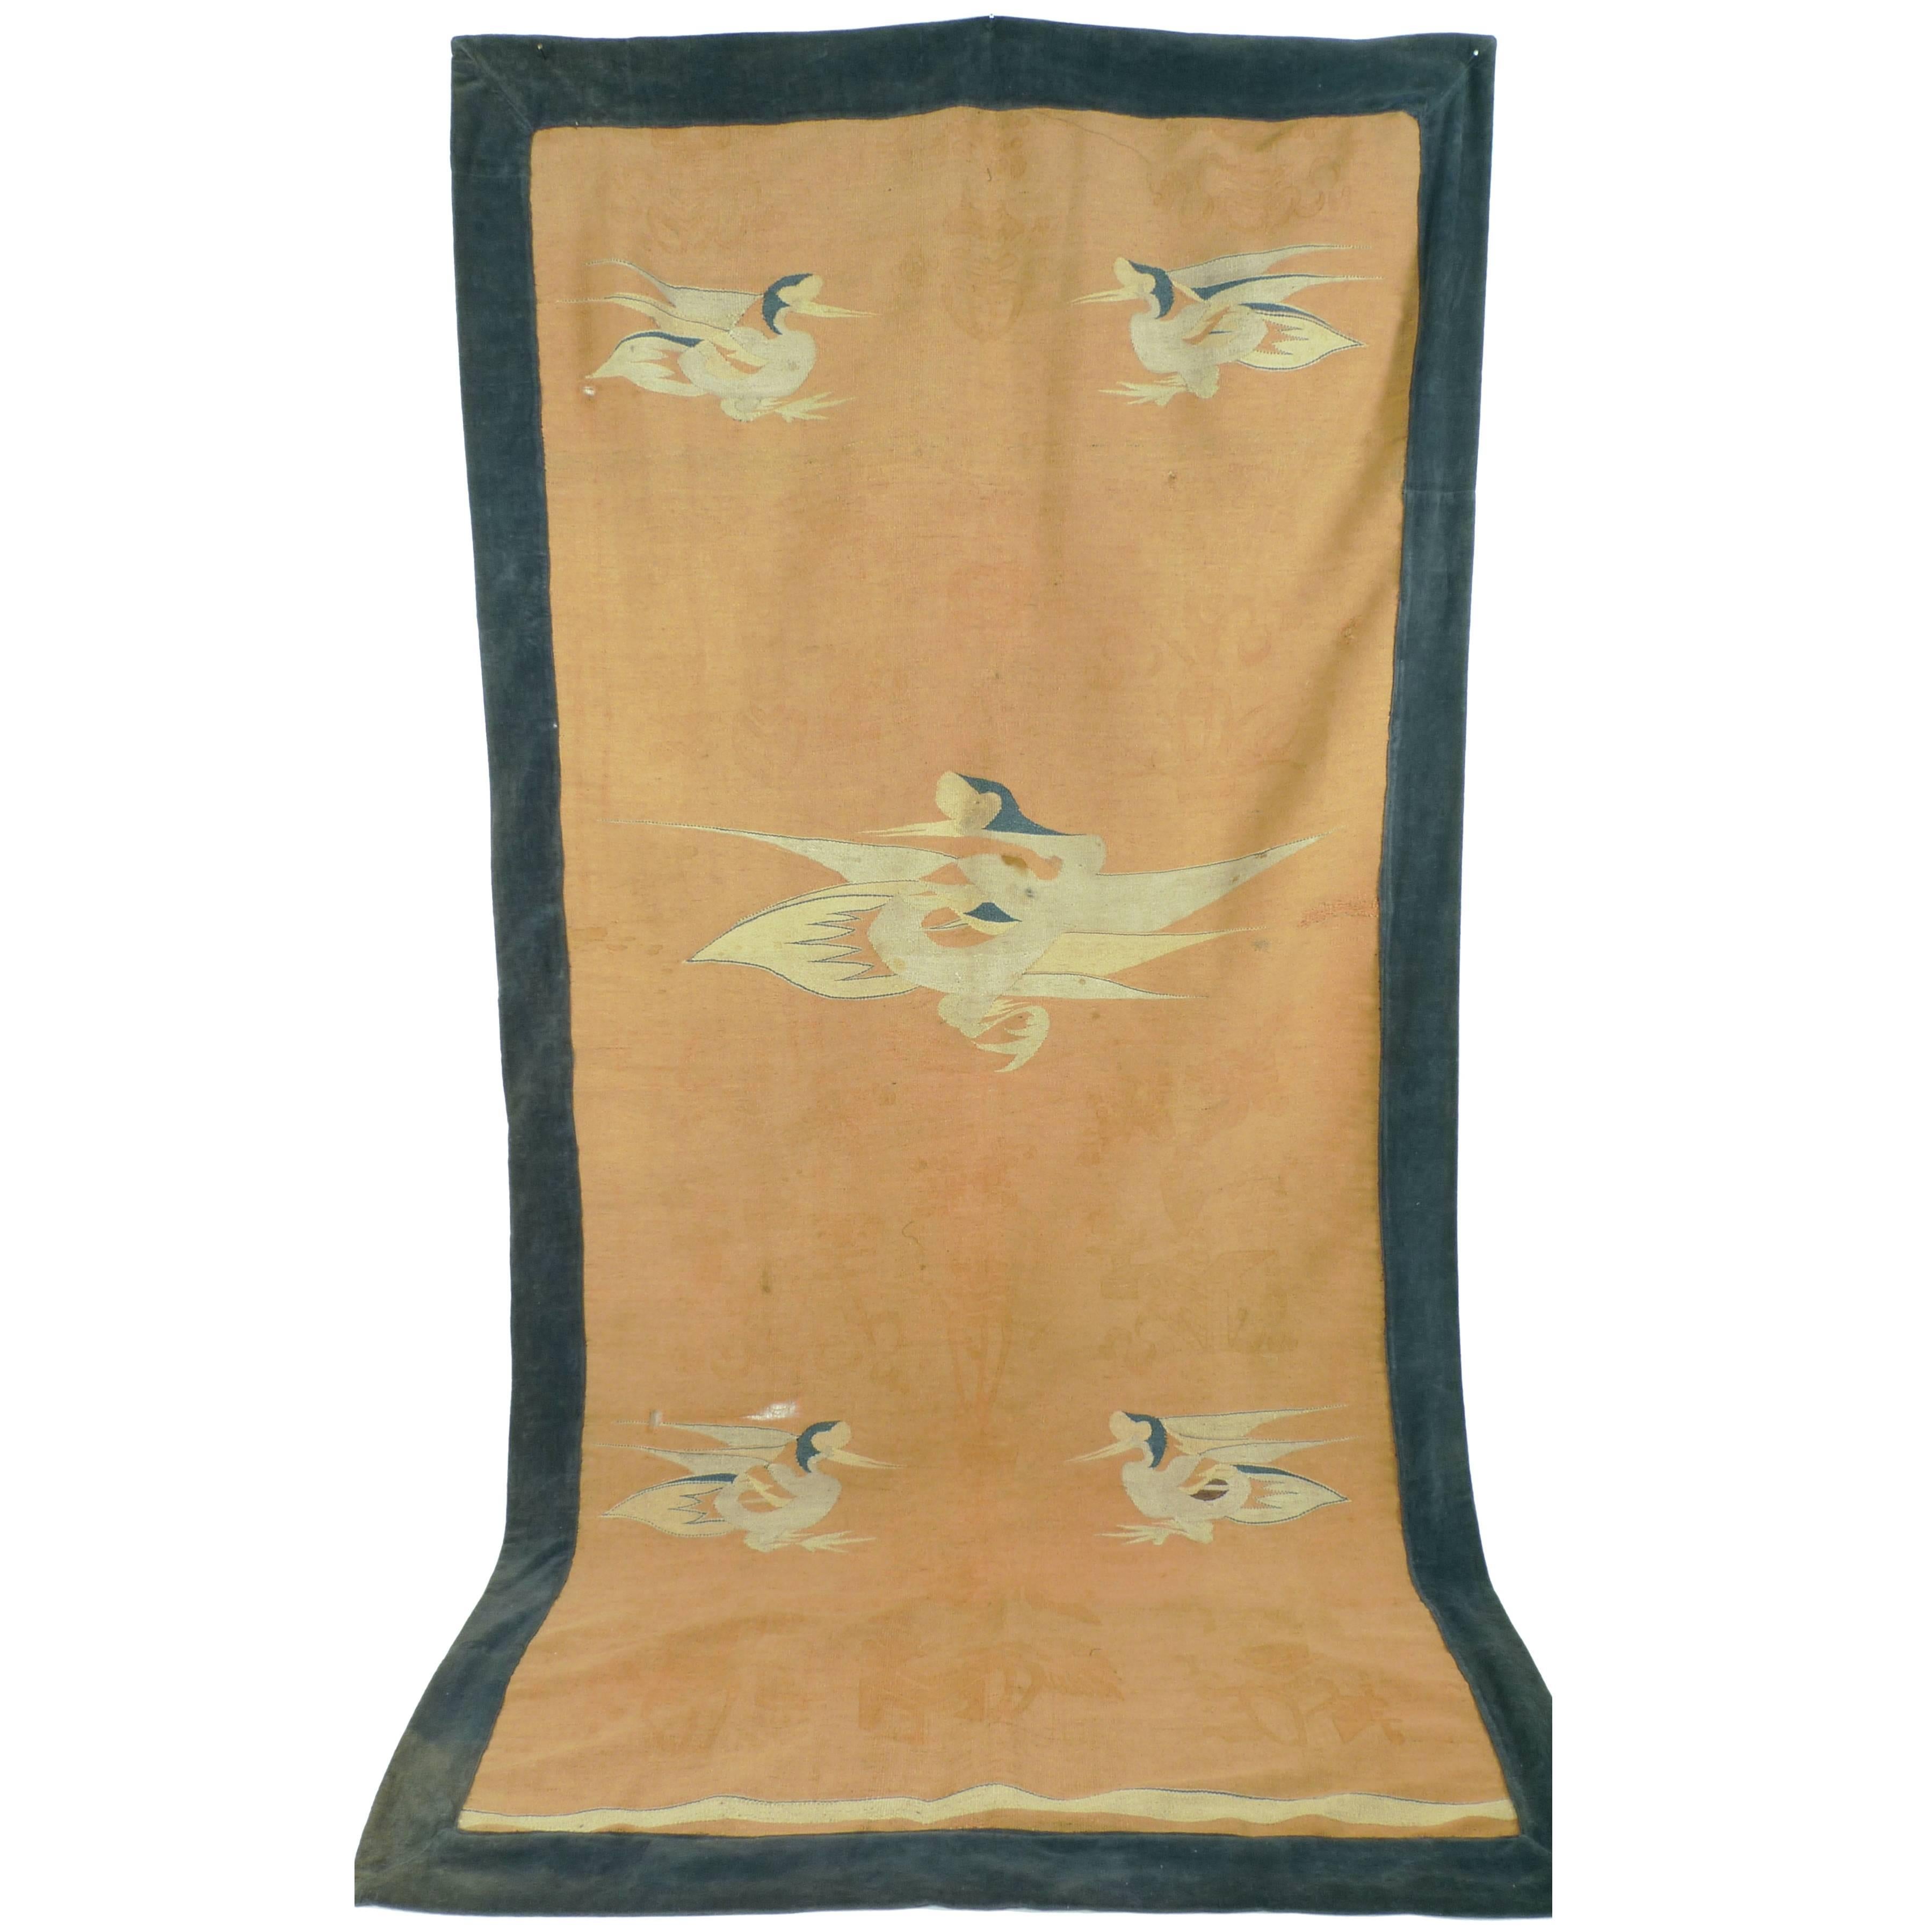 19th Century Mongolian Kilim with Phoenix or Fenghuang Birds 